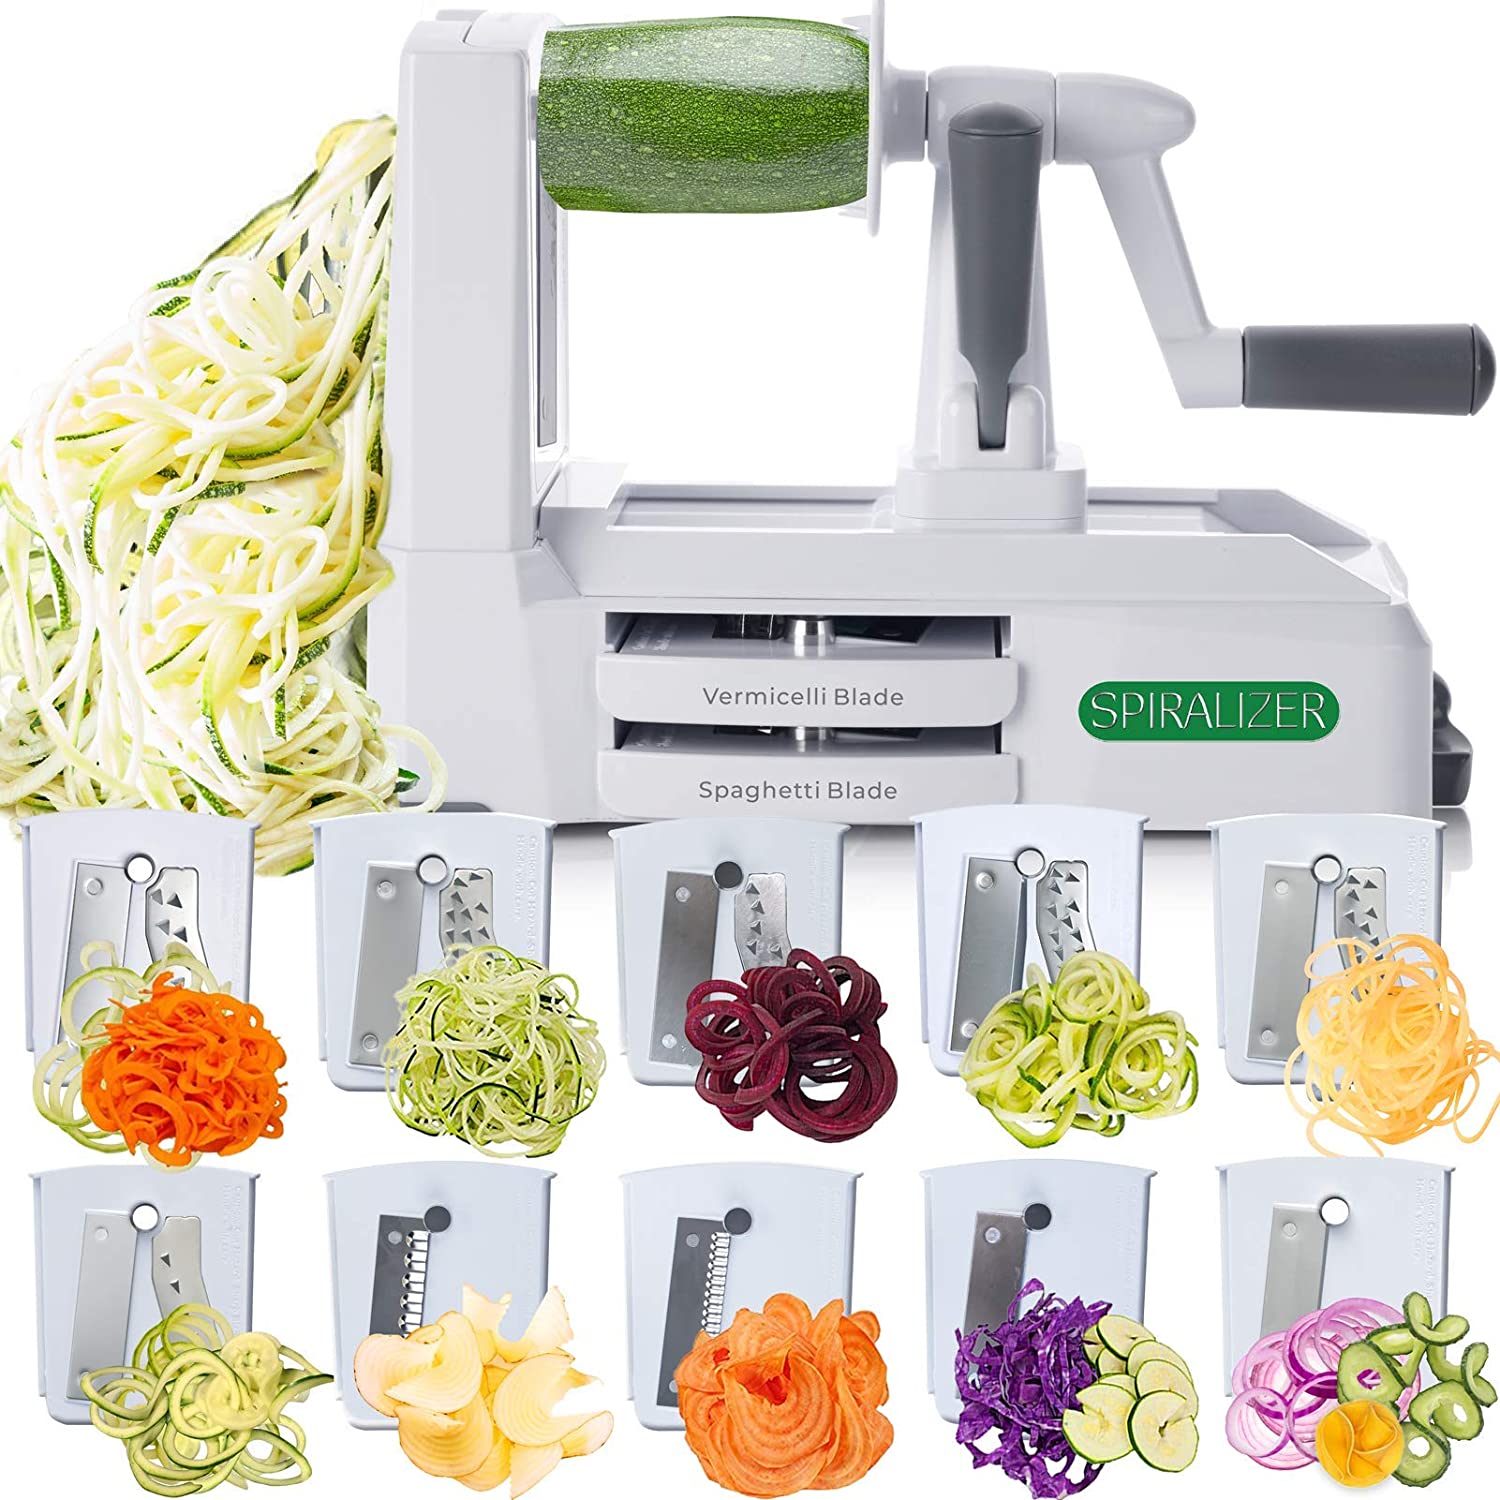 SpiralGenie Stainless Steel 4 Blades Adjustable Left-Right Handle Design Spiral Vegetable Slicer for Zucchini Potato Apples with Strong Suction Base Carrots Cucumbers 